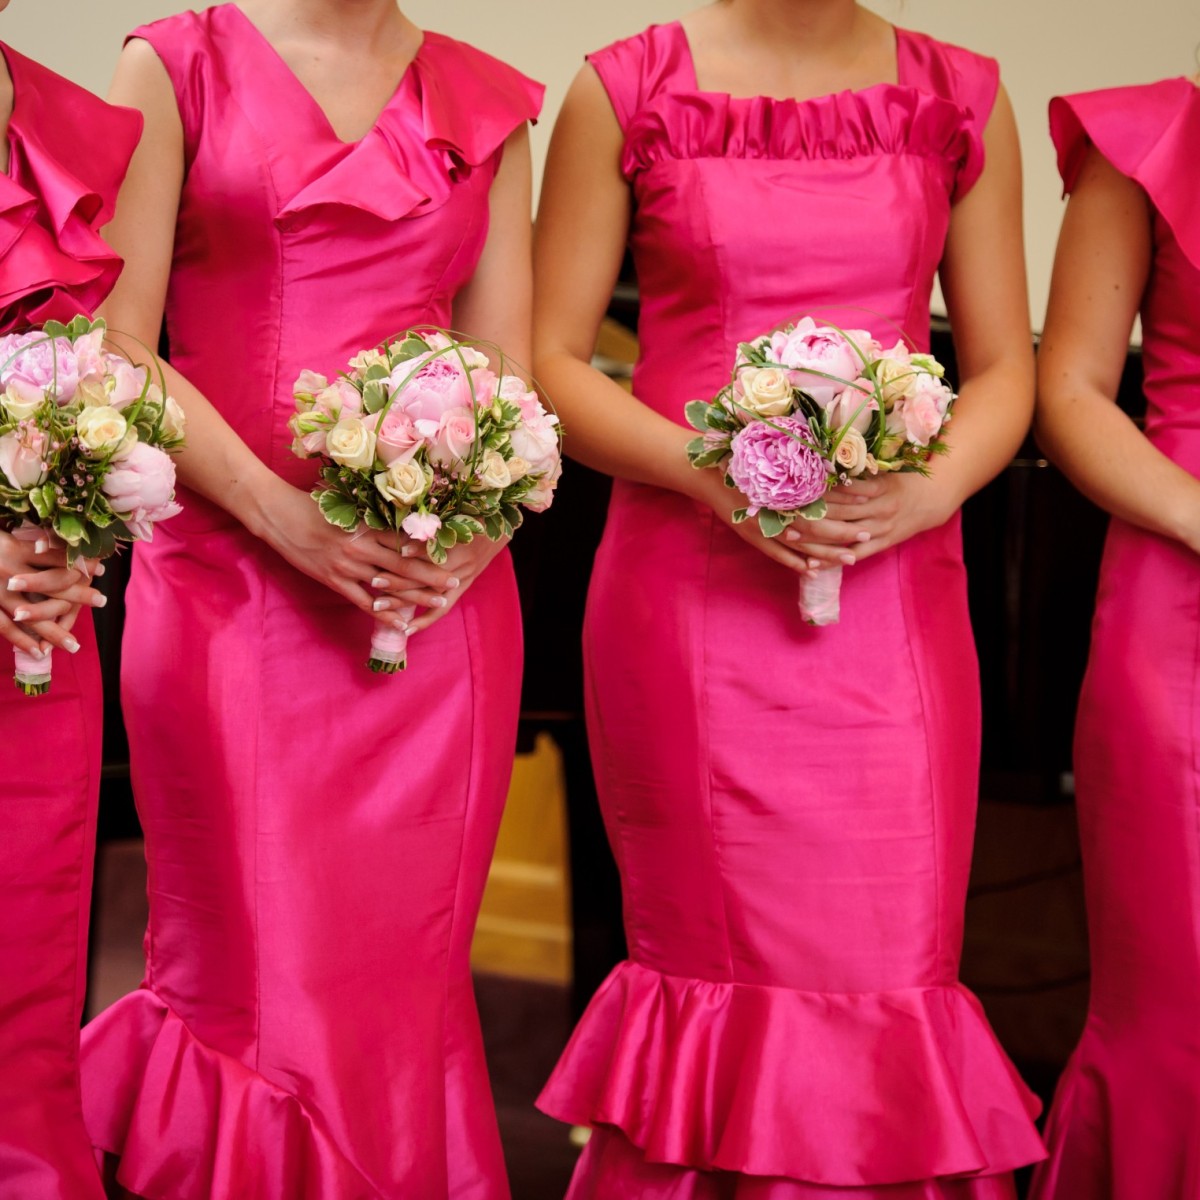 How To Choose The Best Color For Your Bridesmaid Dresses My Frugal Wedding